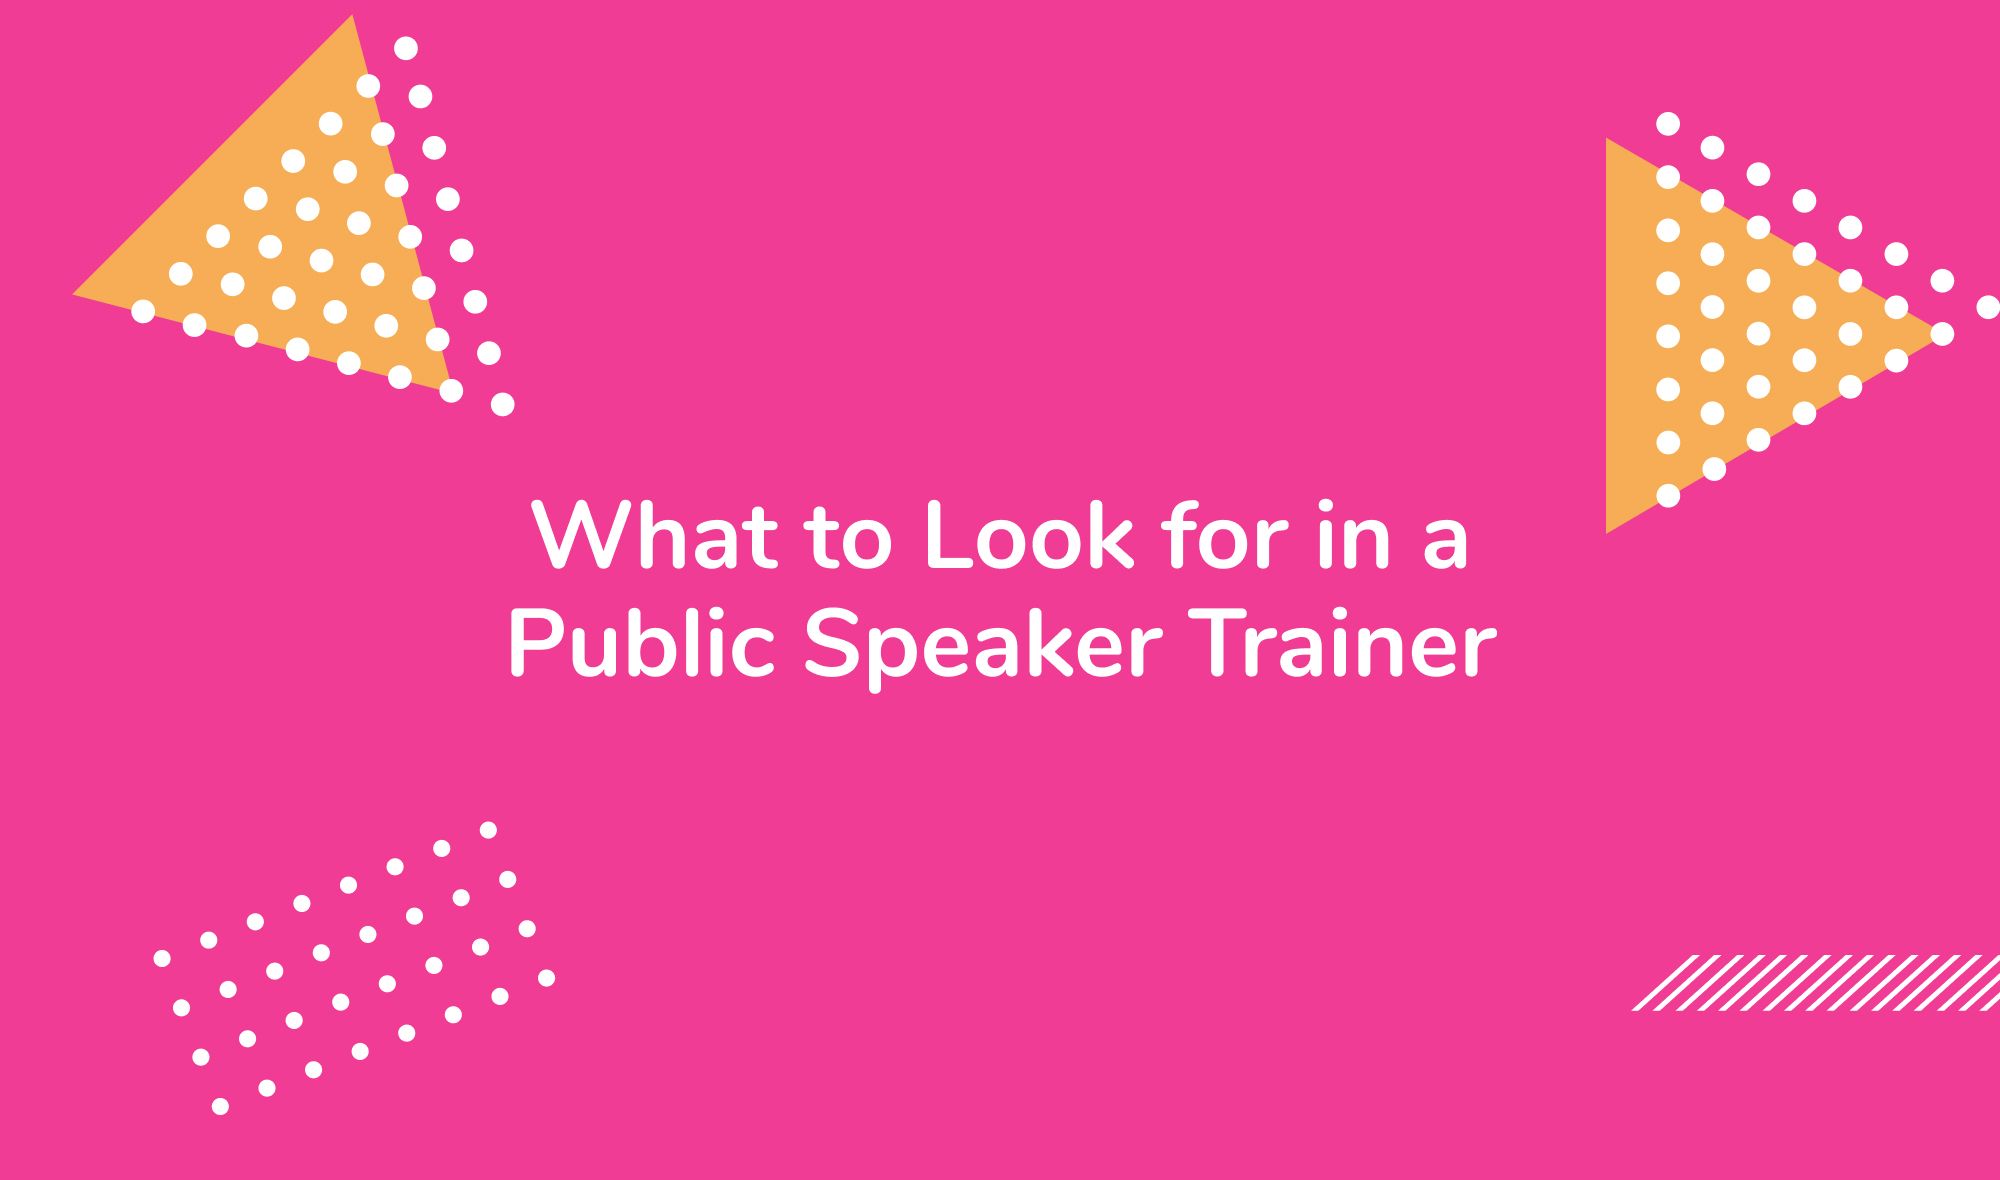 What to Look for in a Public Speaker Trainer